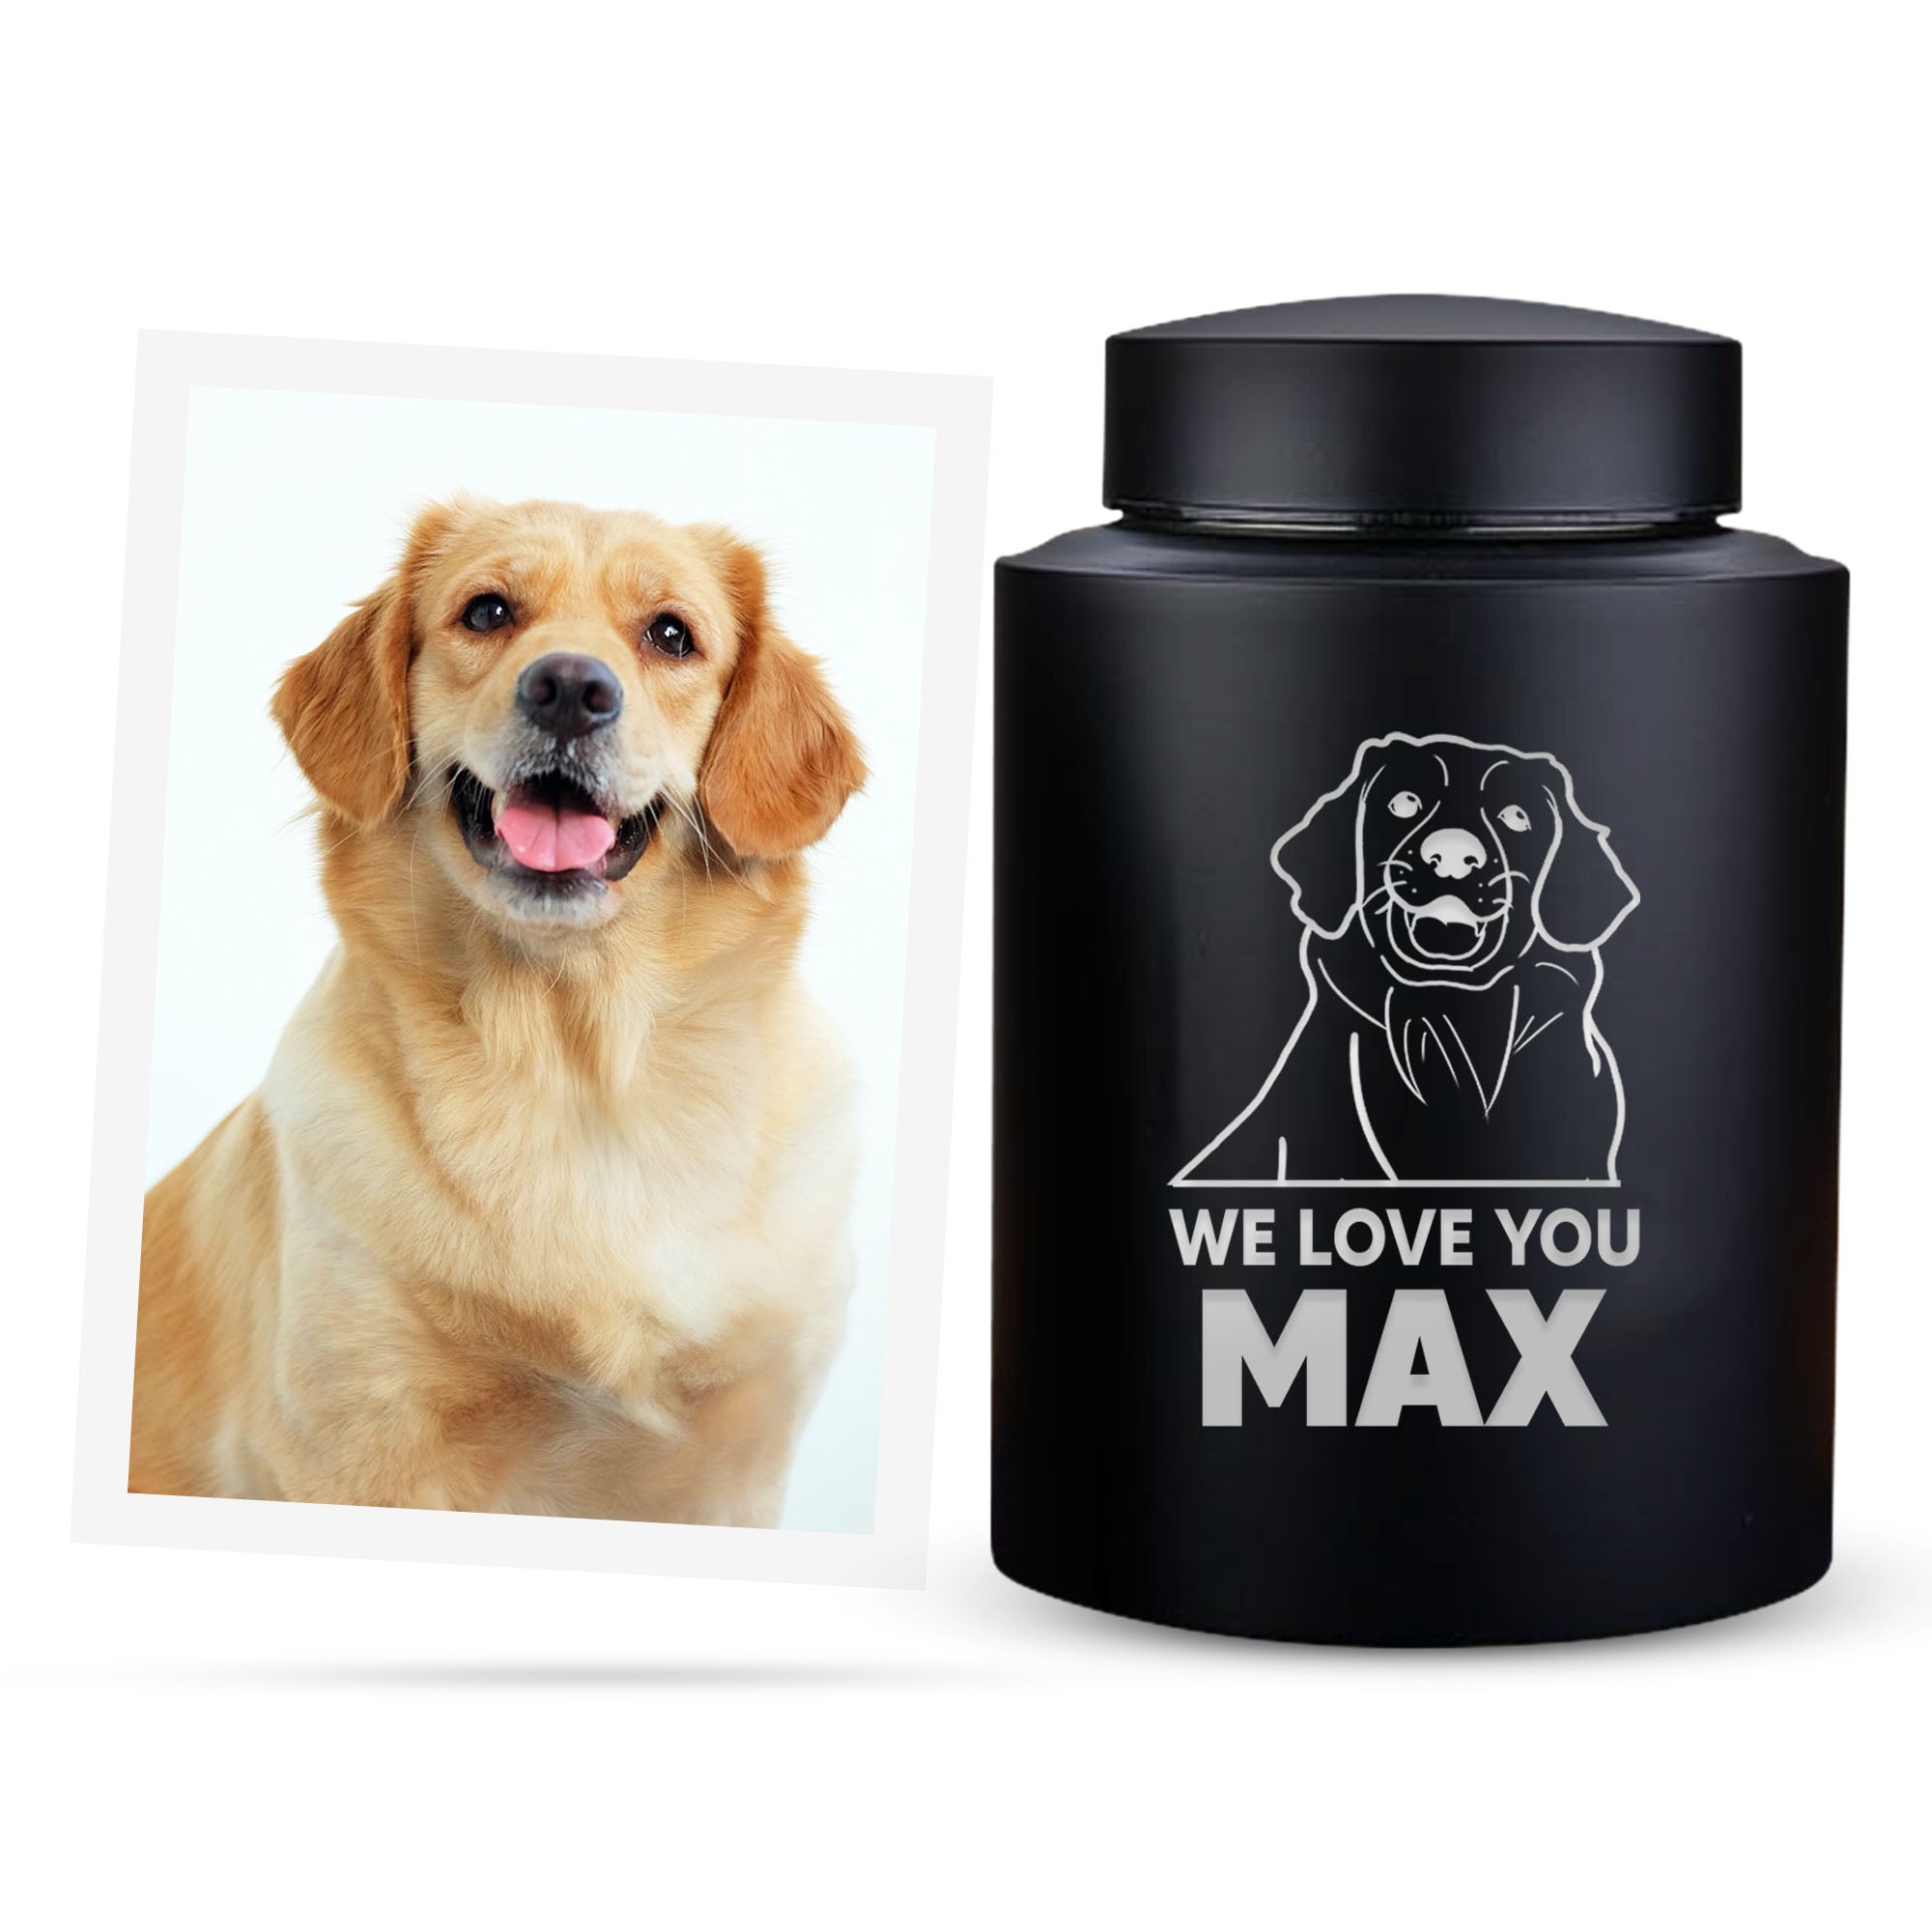 Custom Engraved Large Pet Memorial Urn with Personalized Photo/Image - Round Powder Coated Steel Urns for Pets Ashes, Pet Size 90-115 lbs | Name, Date, and Text Engraving Included | (Black)